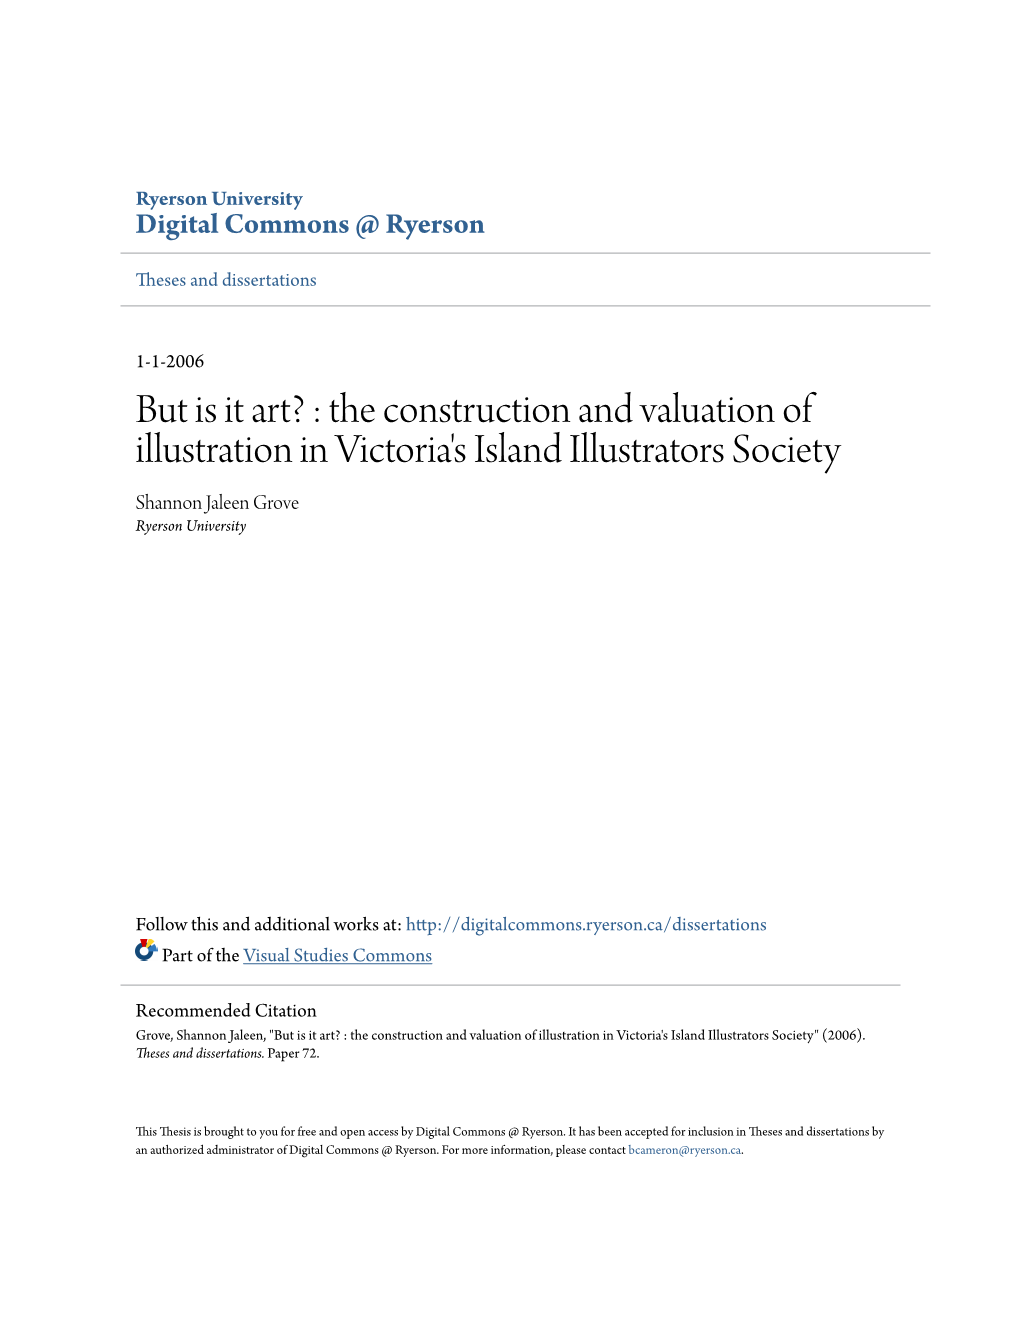 But Is It Art? : the Construction and Valuation of Illustration in Victoria's Island Illustrators Society Shannon Jaleen Grove Ryerson University